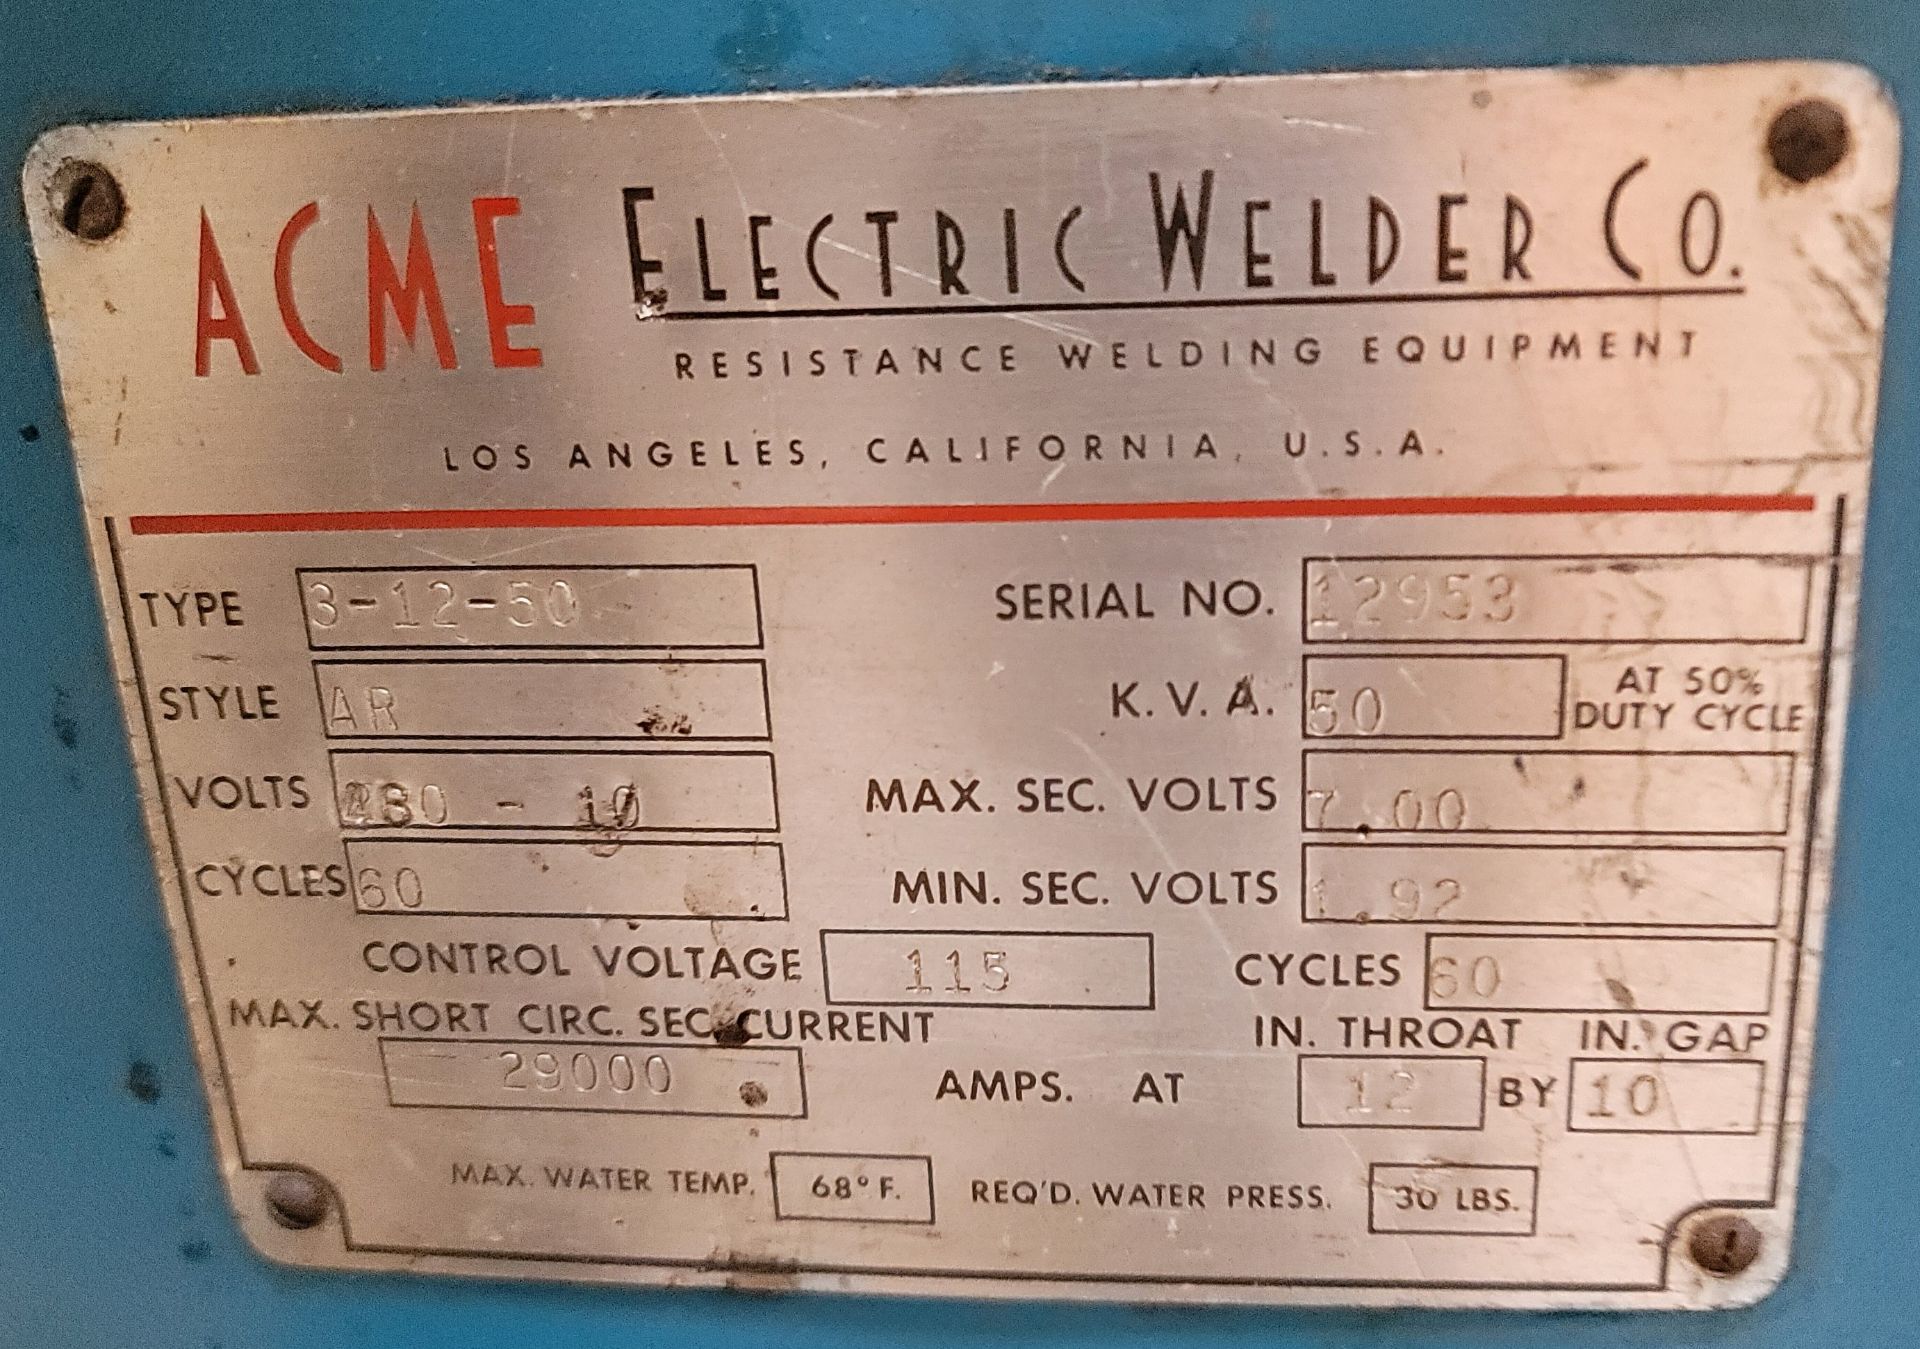 ACME 50 KVA SPOT WELDER, TYPE: 3-12-50, STYLE: AR, 460 V, CONTROL VOLTAGE: 115, S/N 12953, 22" - Image 5 of 5